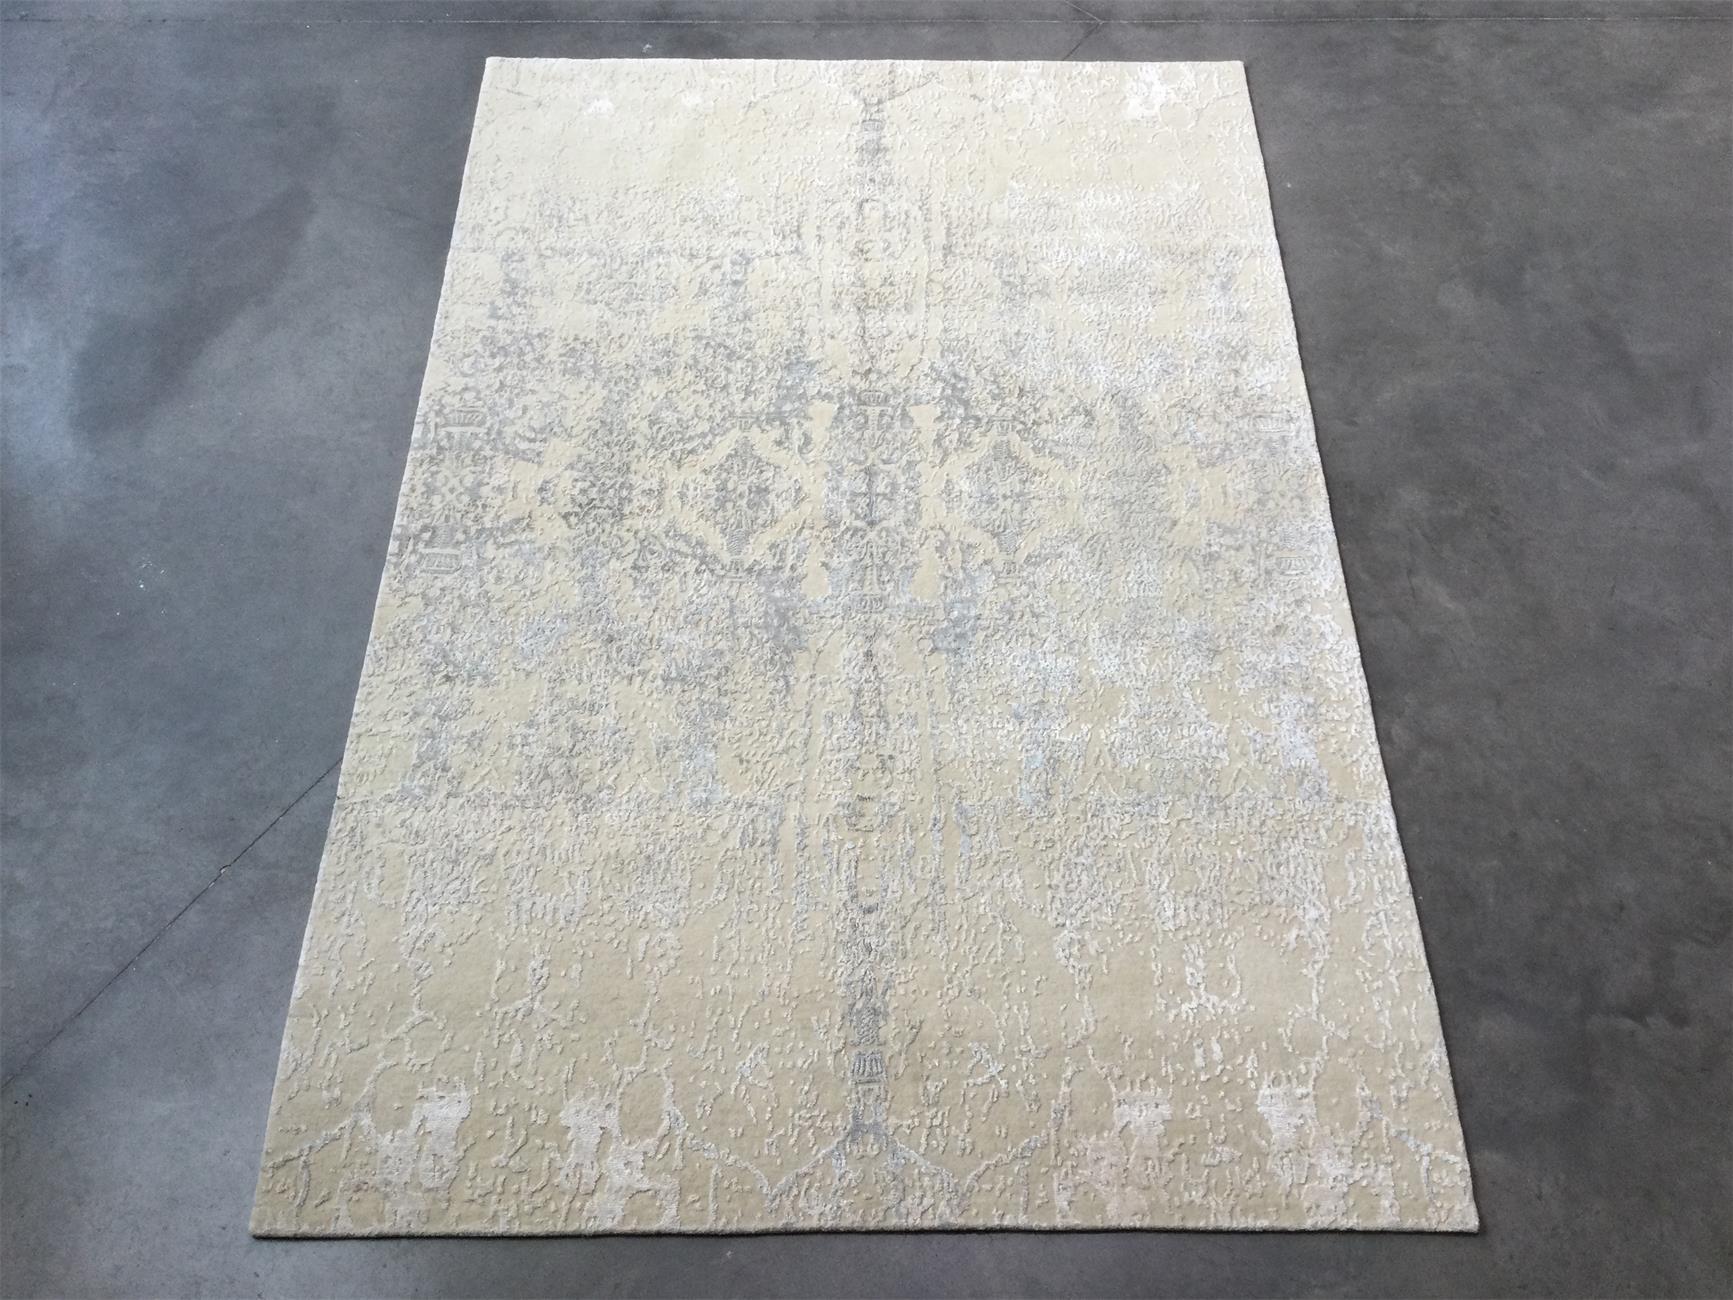 Contemporary rug belonging to our Abstract Collection. Measures: 3.00 x 2.50 m.
- Handmade in silk and wool in the artisan workshops of the Zigler firm.
- Incredible mix between the old and the contemporary.
- Silk designs with a wool structure that